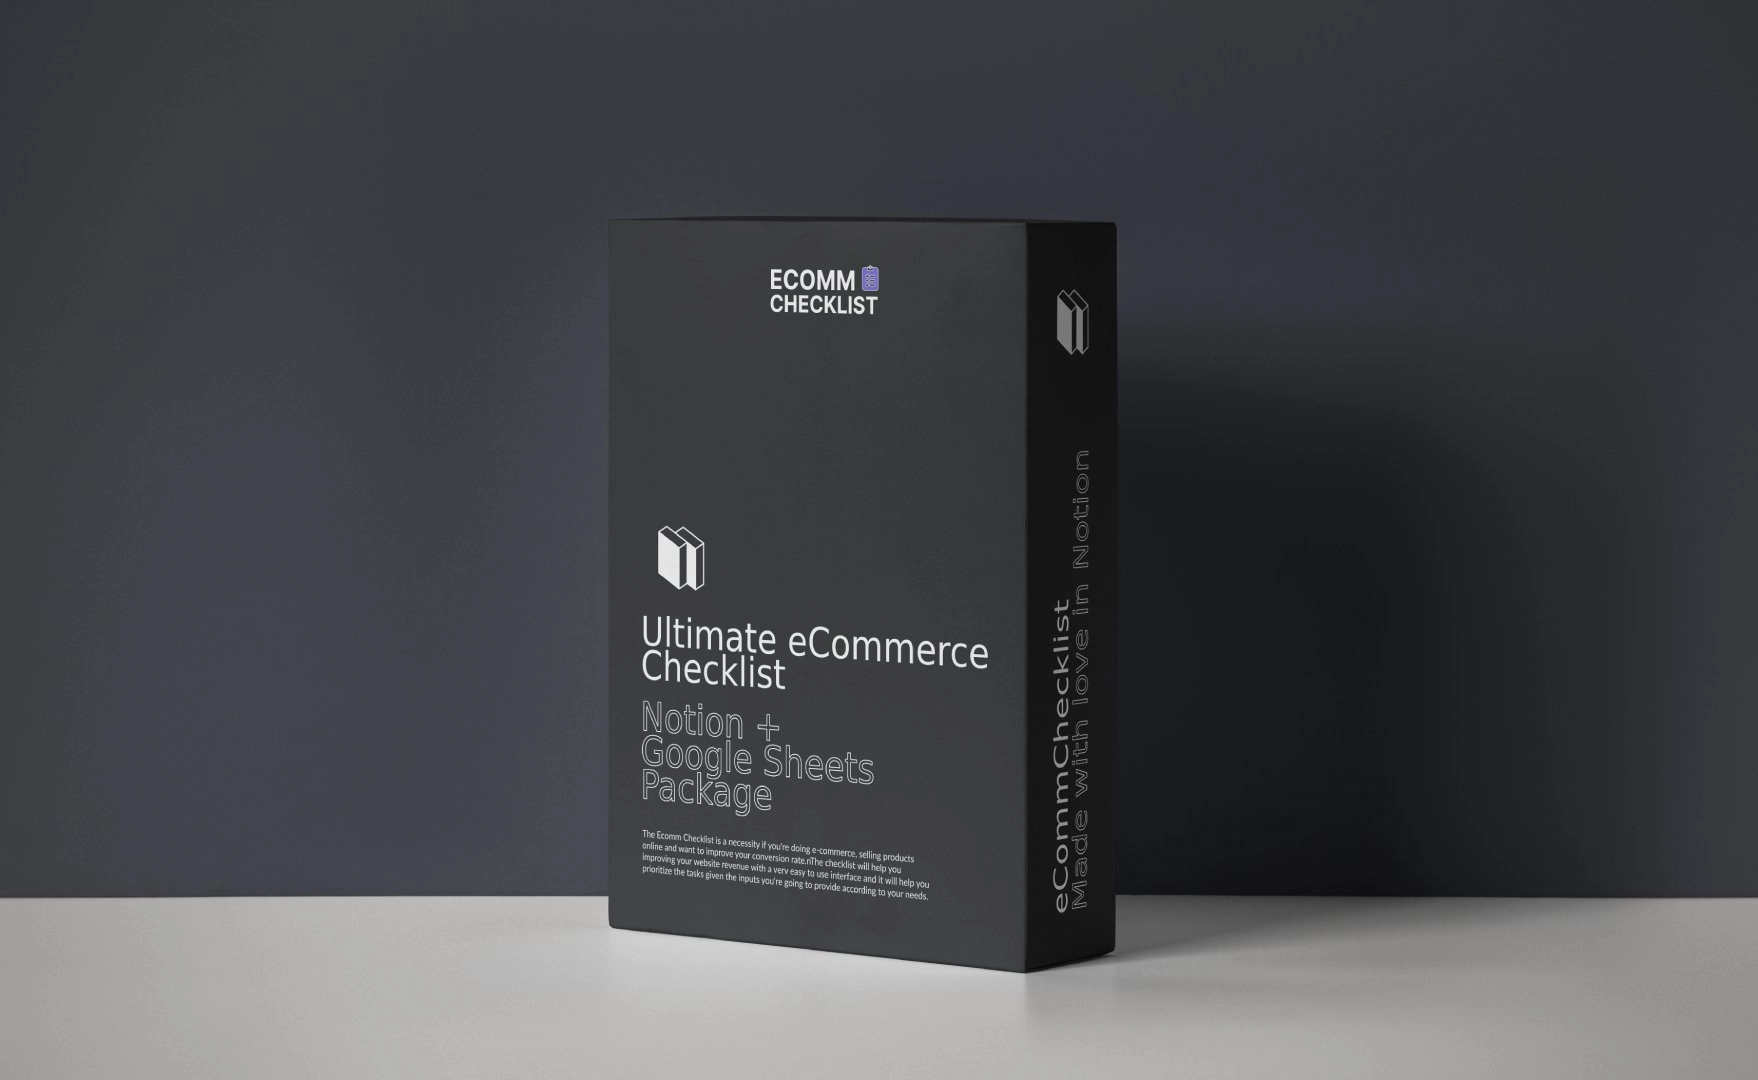 Notion EcommChecklist - Conversion Rate Optimization for eCommerce Websites